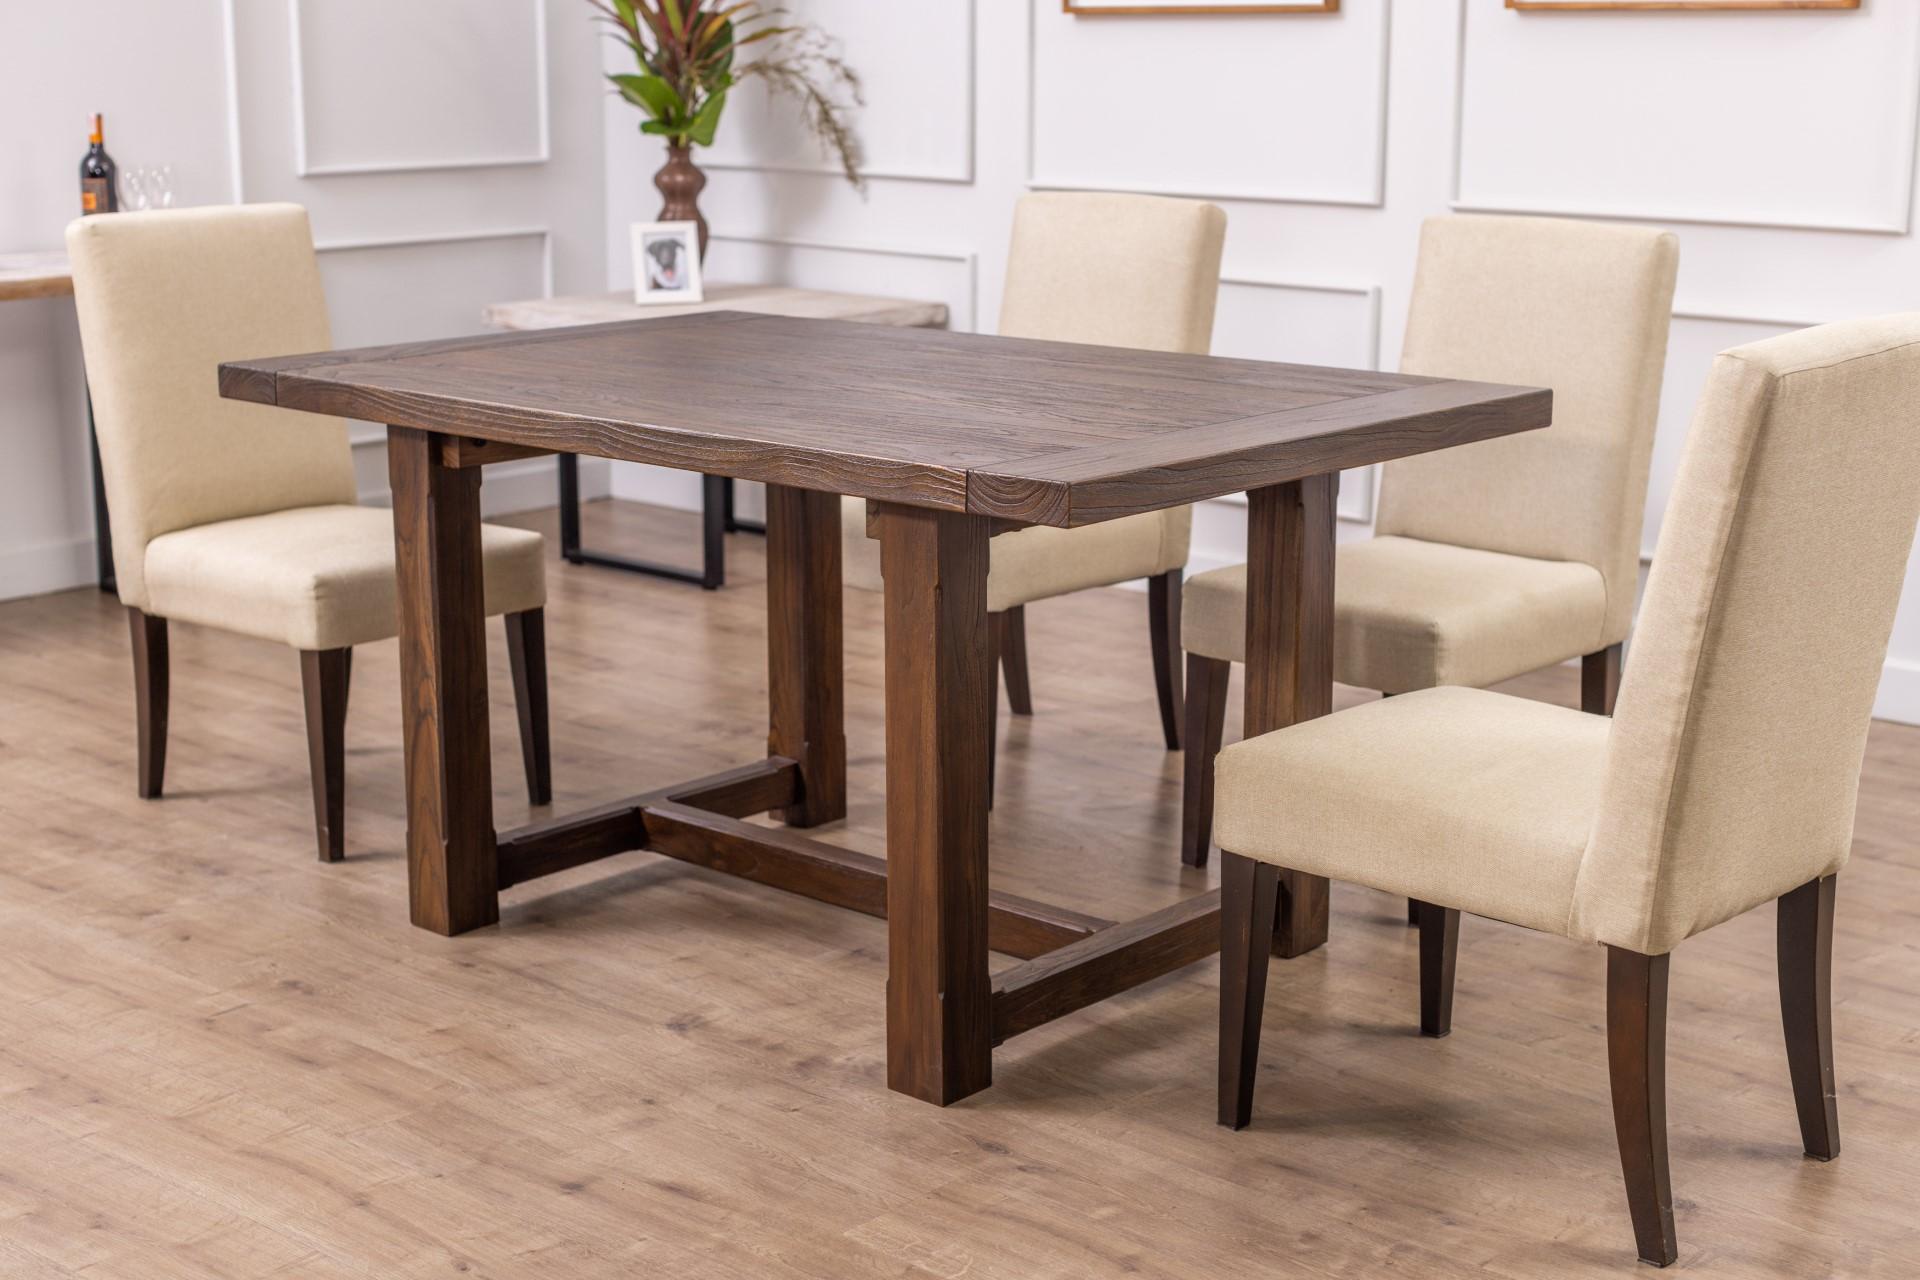 The charm of this table brings a modern sense of rural retreat into your home. A beautifully crafted solid wood top crowns a wood beam base that highlights artisan joinery techniques. It reflects the true craftsmanship of furniture making with a